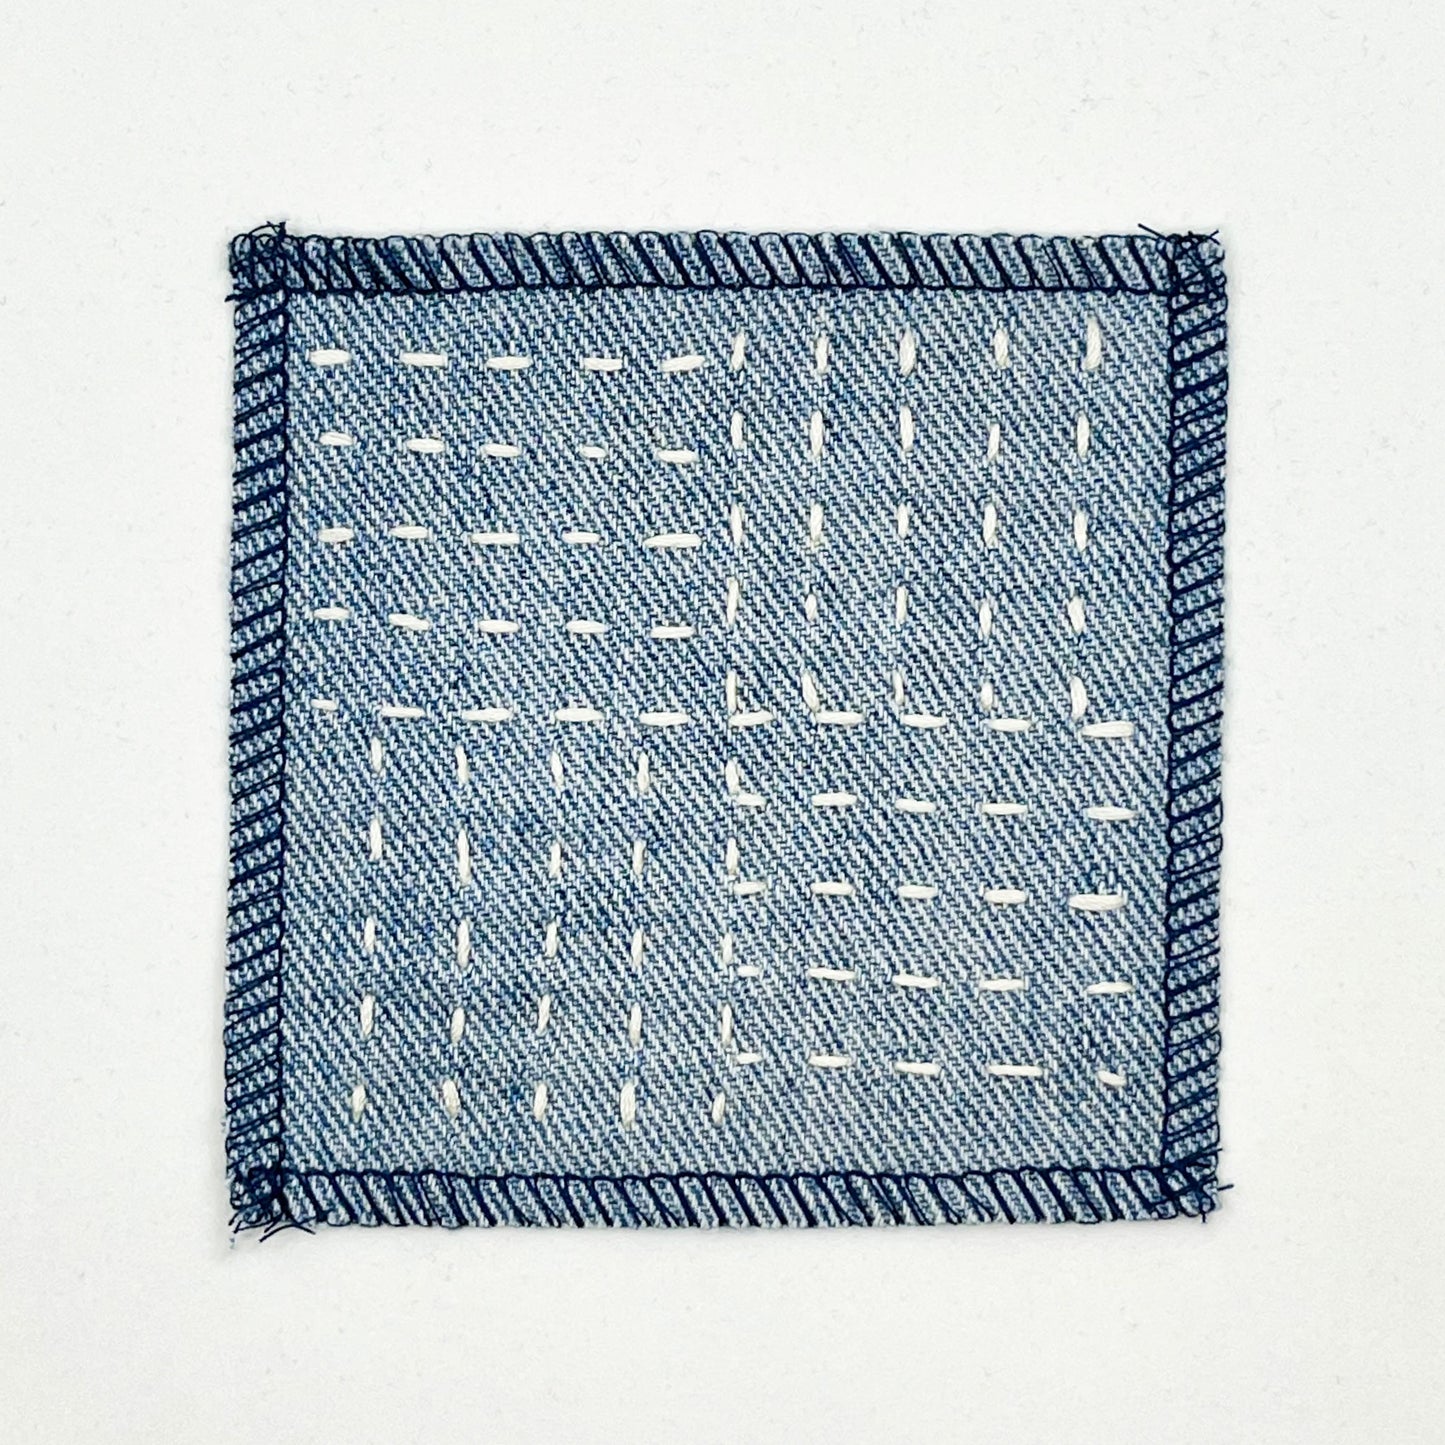 a square denim patch hand stitched in ivory with sashiko style running stitches in the pattern of a basket weave on a white background